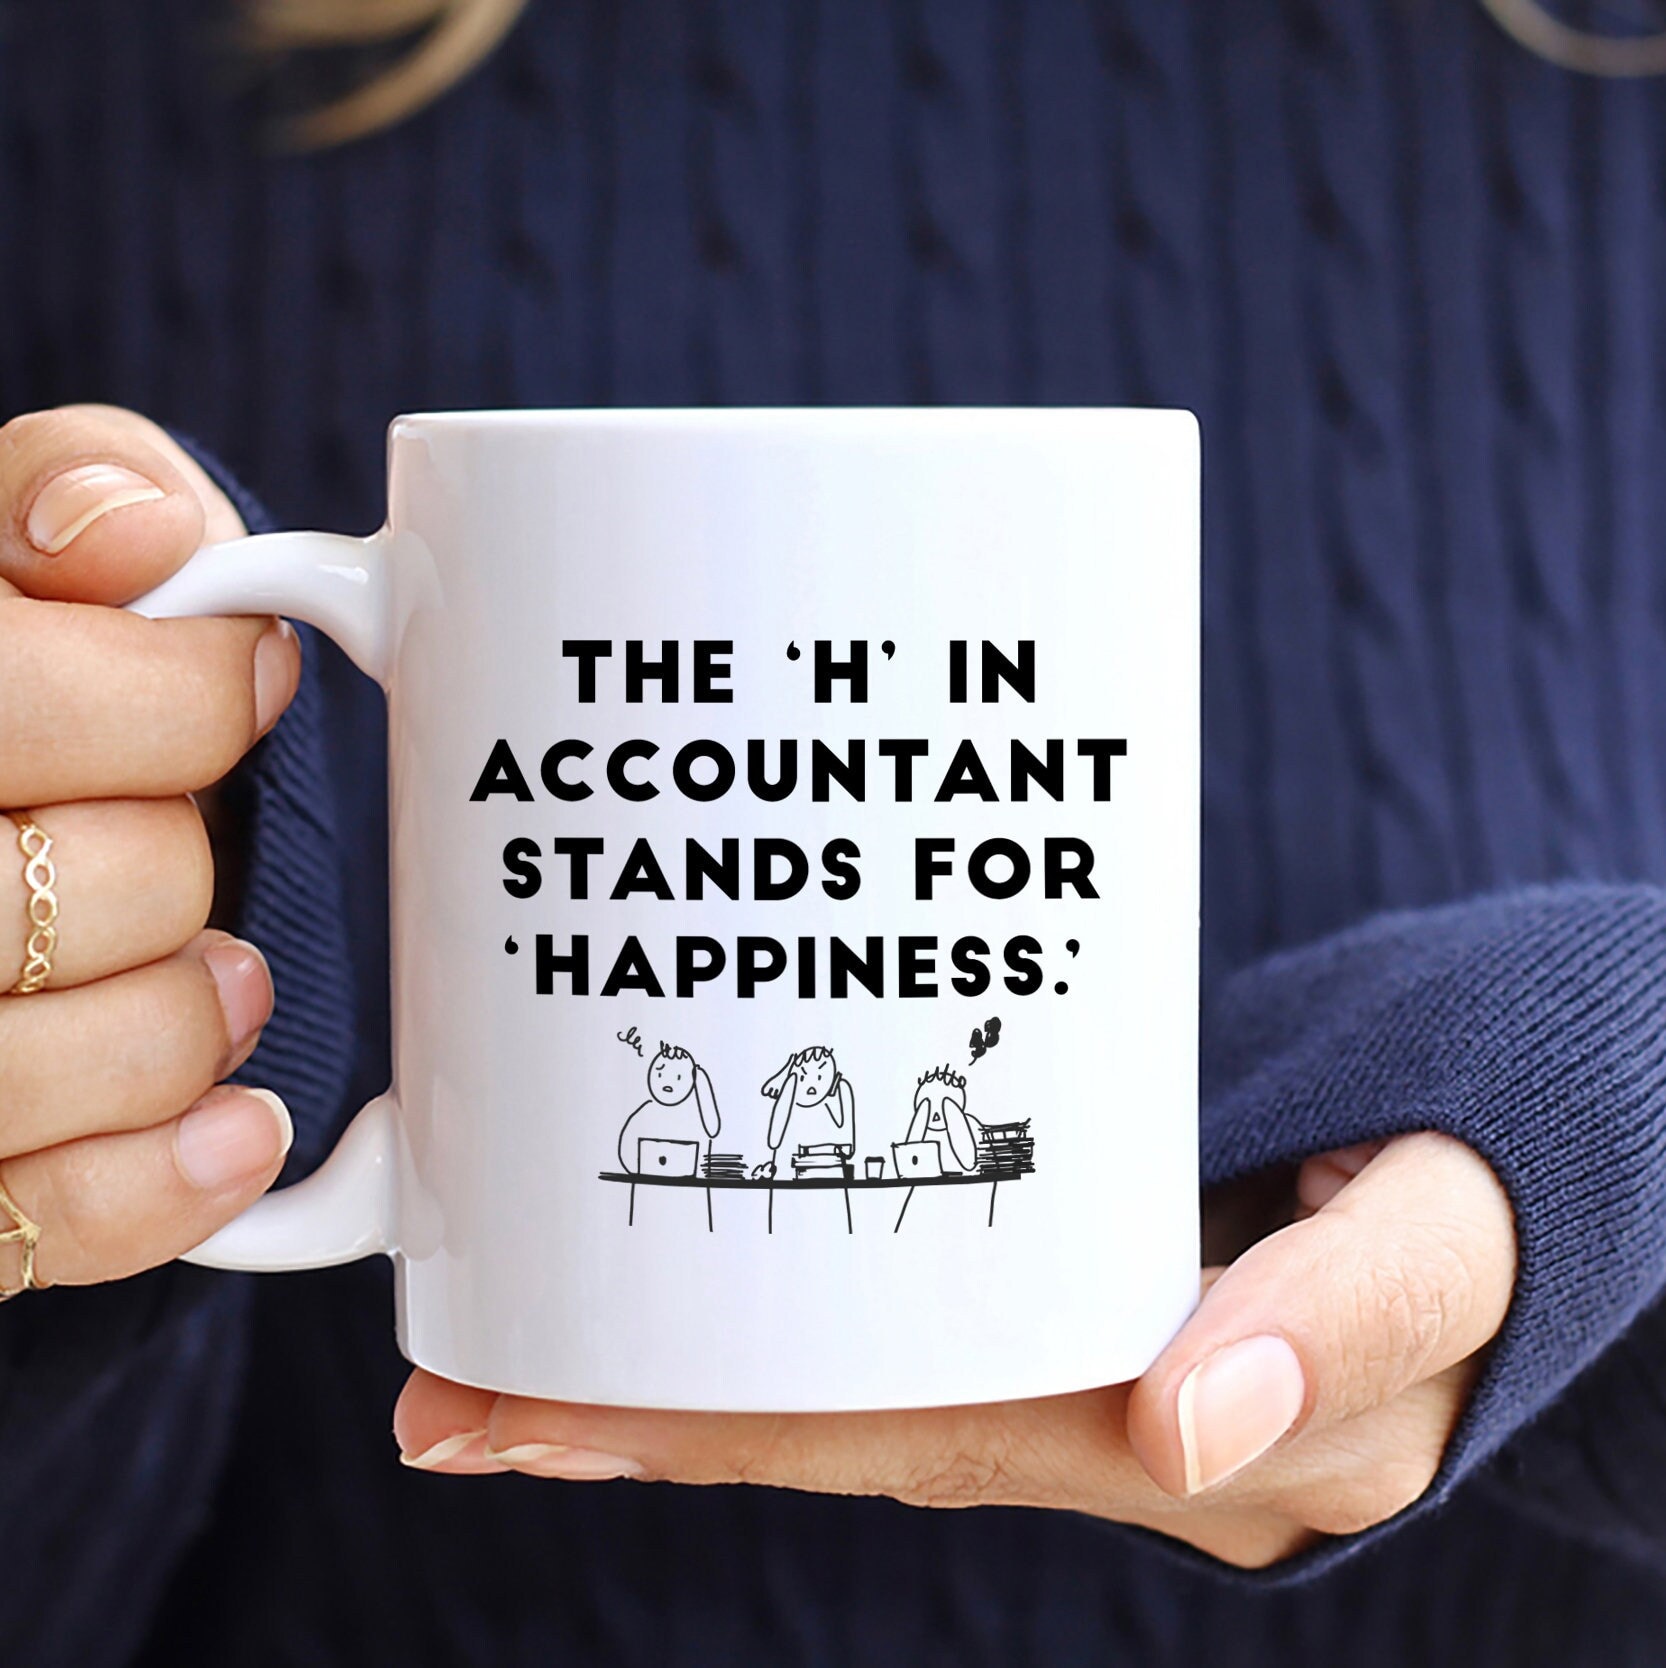 Cross Check-The Accounting Hub - Happy Learning ✌ #accounting